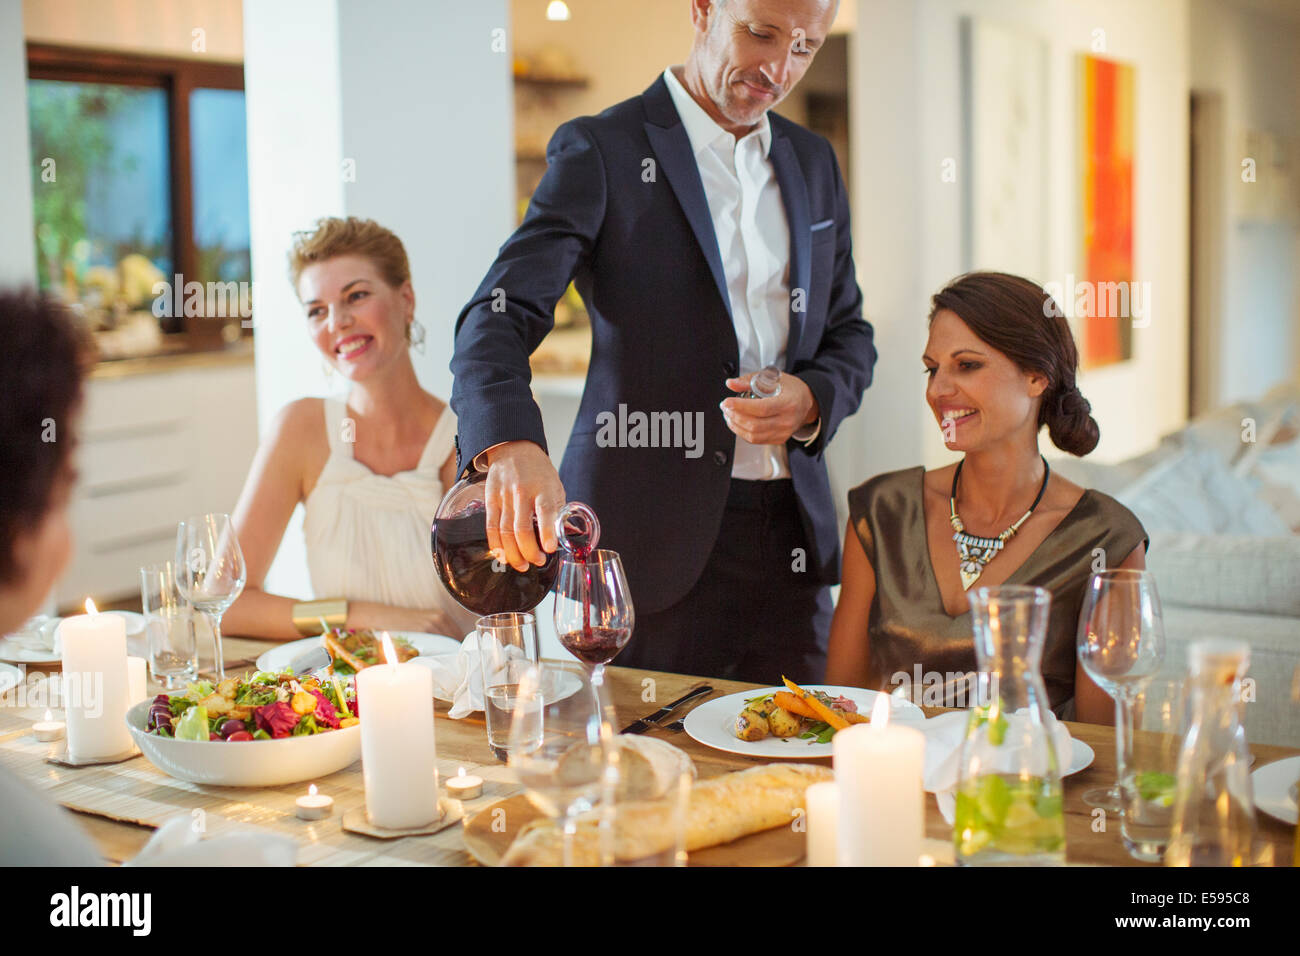 Man pouring wine at dinner party Banque D'Images